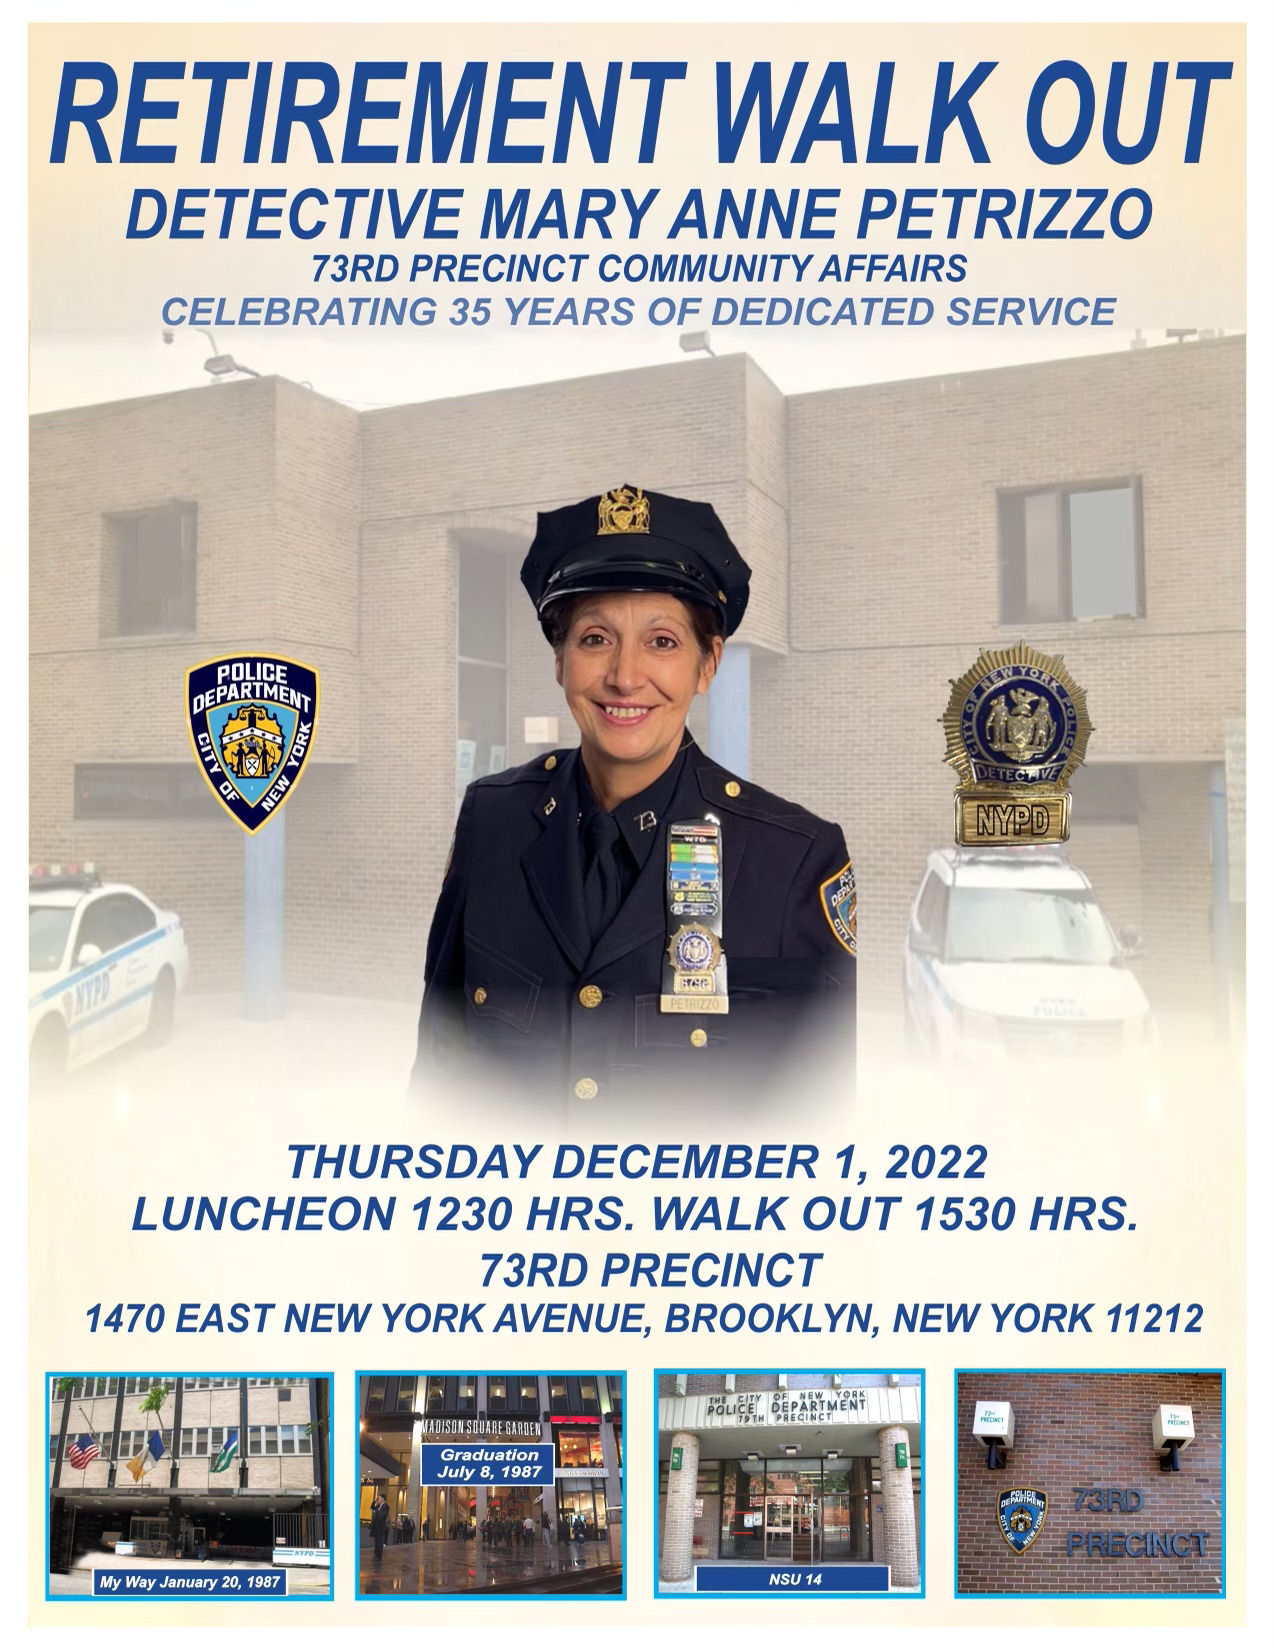 Retirement Walk Out for Detective Mary Anne Petrizzo of the 73rd Precinct